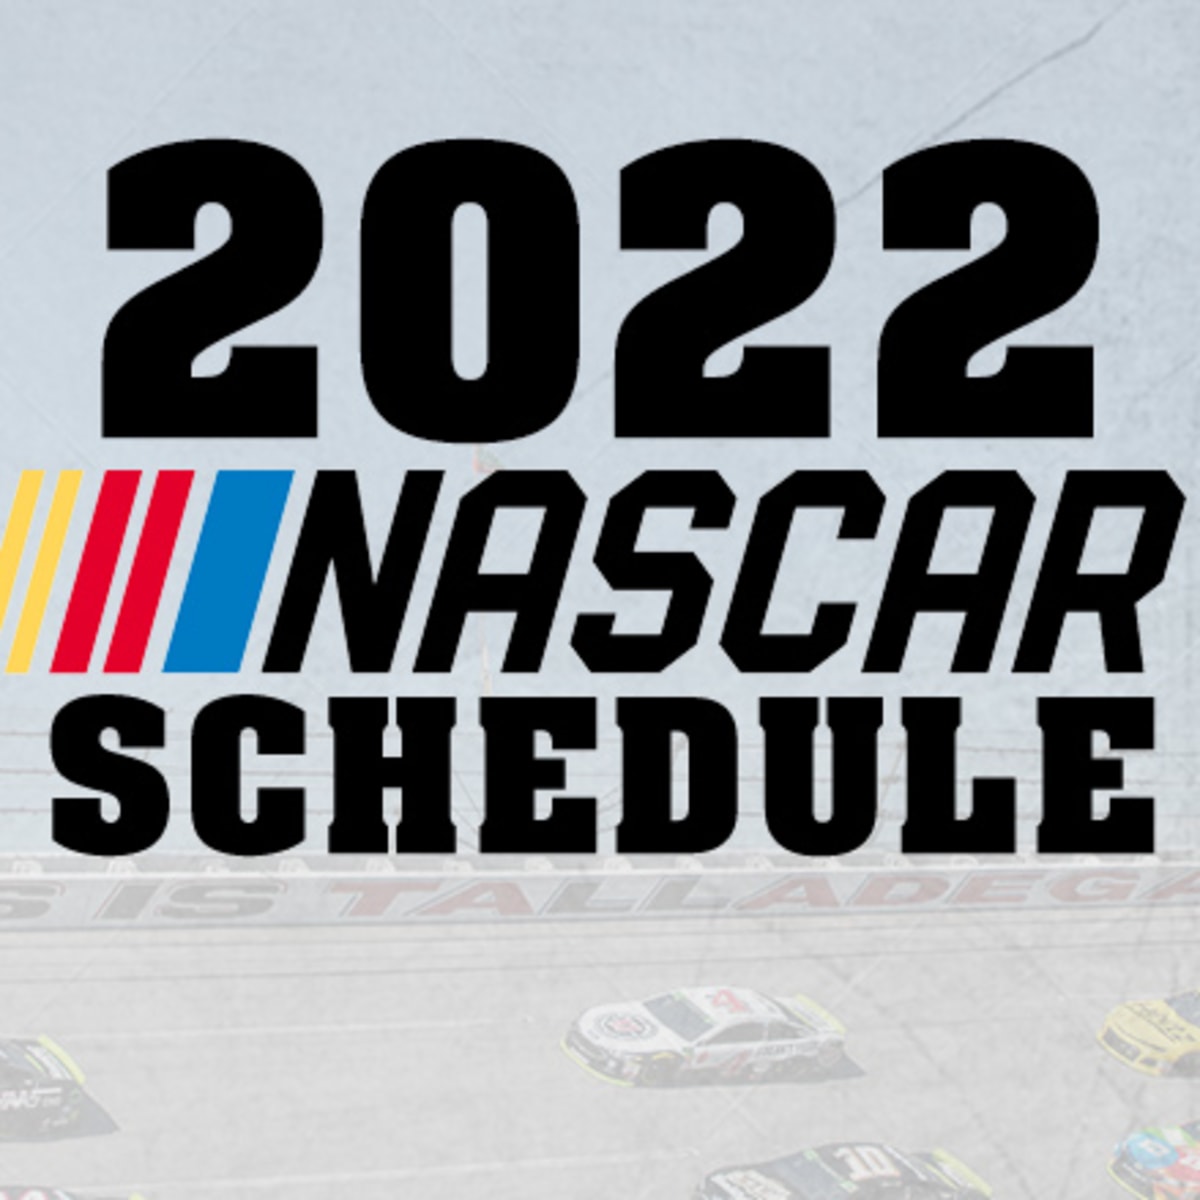 Nascar 2022 Schedule Pdf 2022 Nascar Schedule: Nascar Cup Series - Athlonsports.com | Expert  Predictions, Picks, And Previews